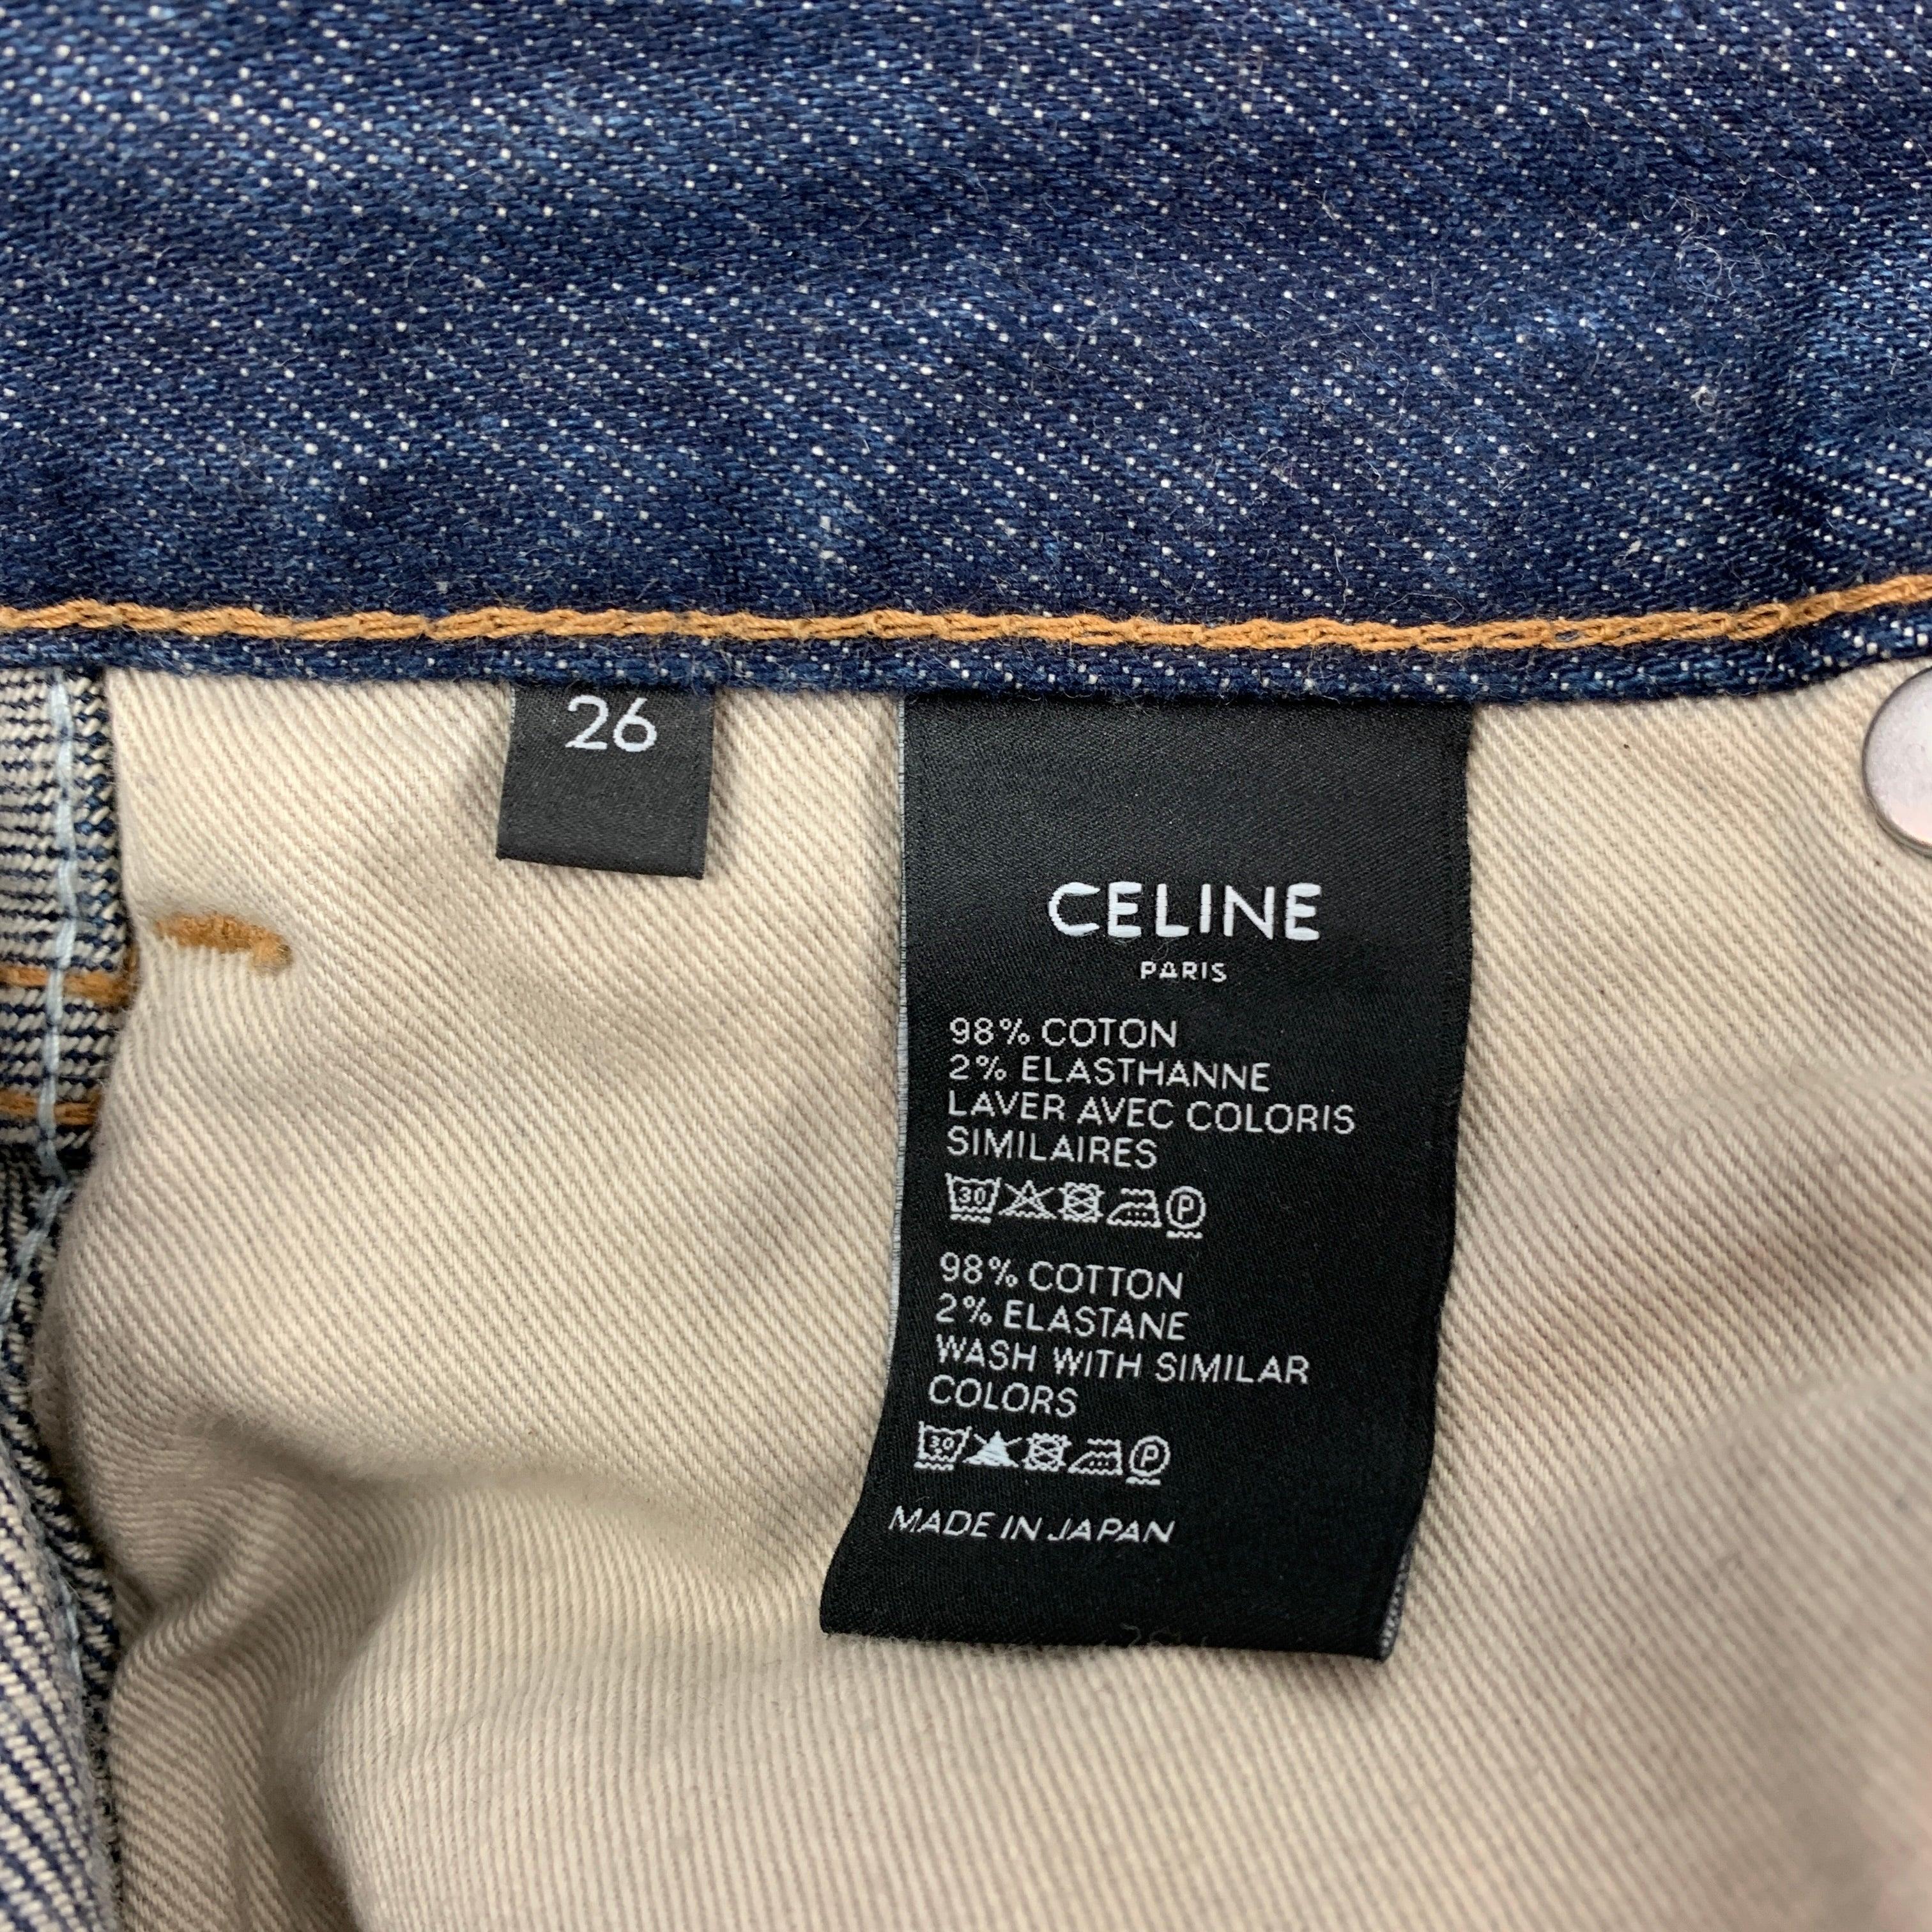 CELINE Size 26 Dark Blue Cotton Slim Patch Jeans In Good Condition For Sale In San Francisco, CA